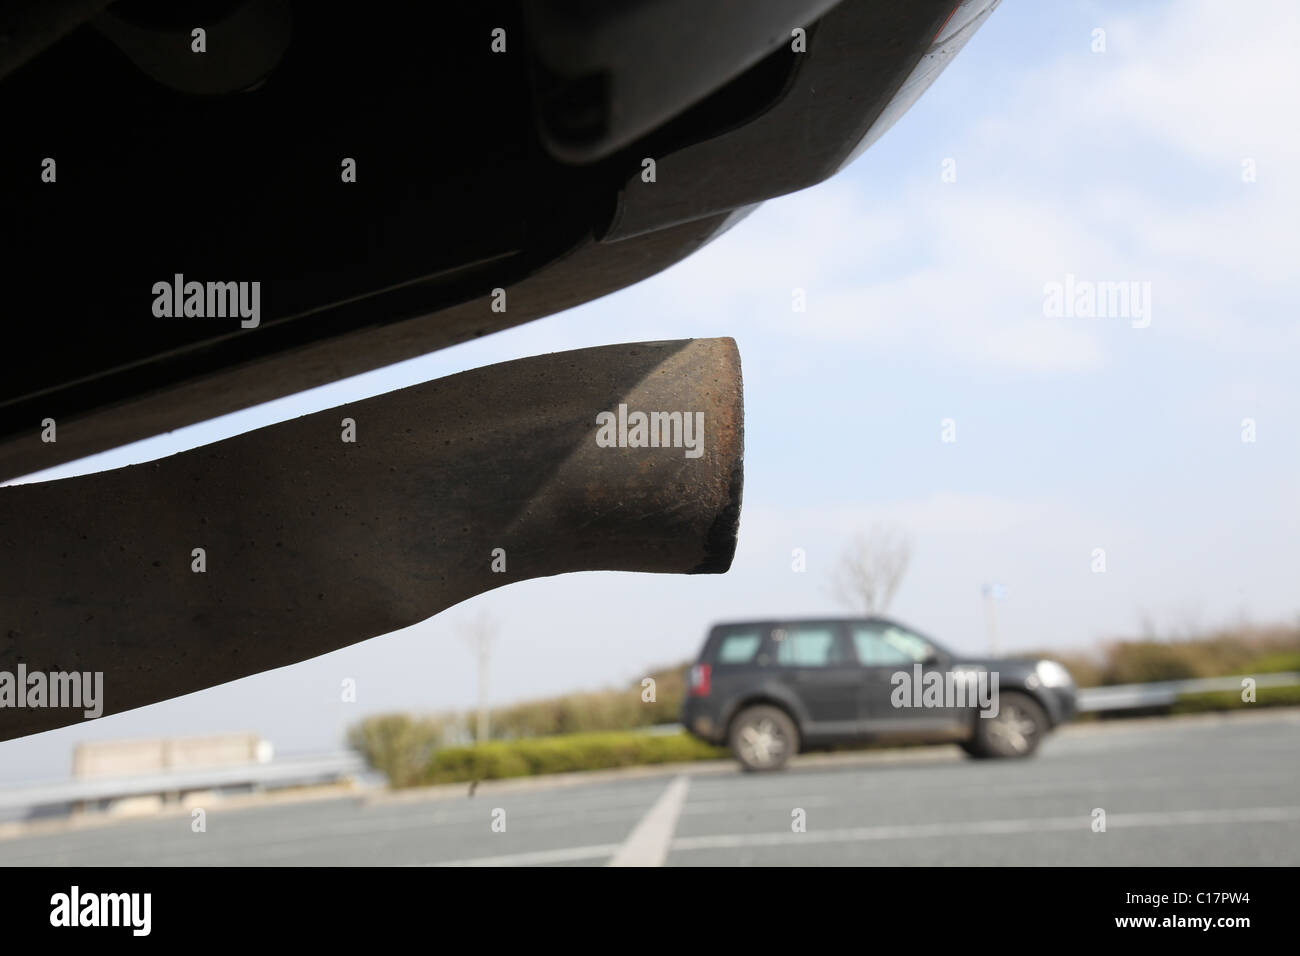 The exhaust pipe of a 4x4 vehicle can be seen with another car in the background March 8, 2011 in Wadebridge, United Kingdom. Stock Photo